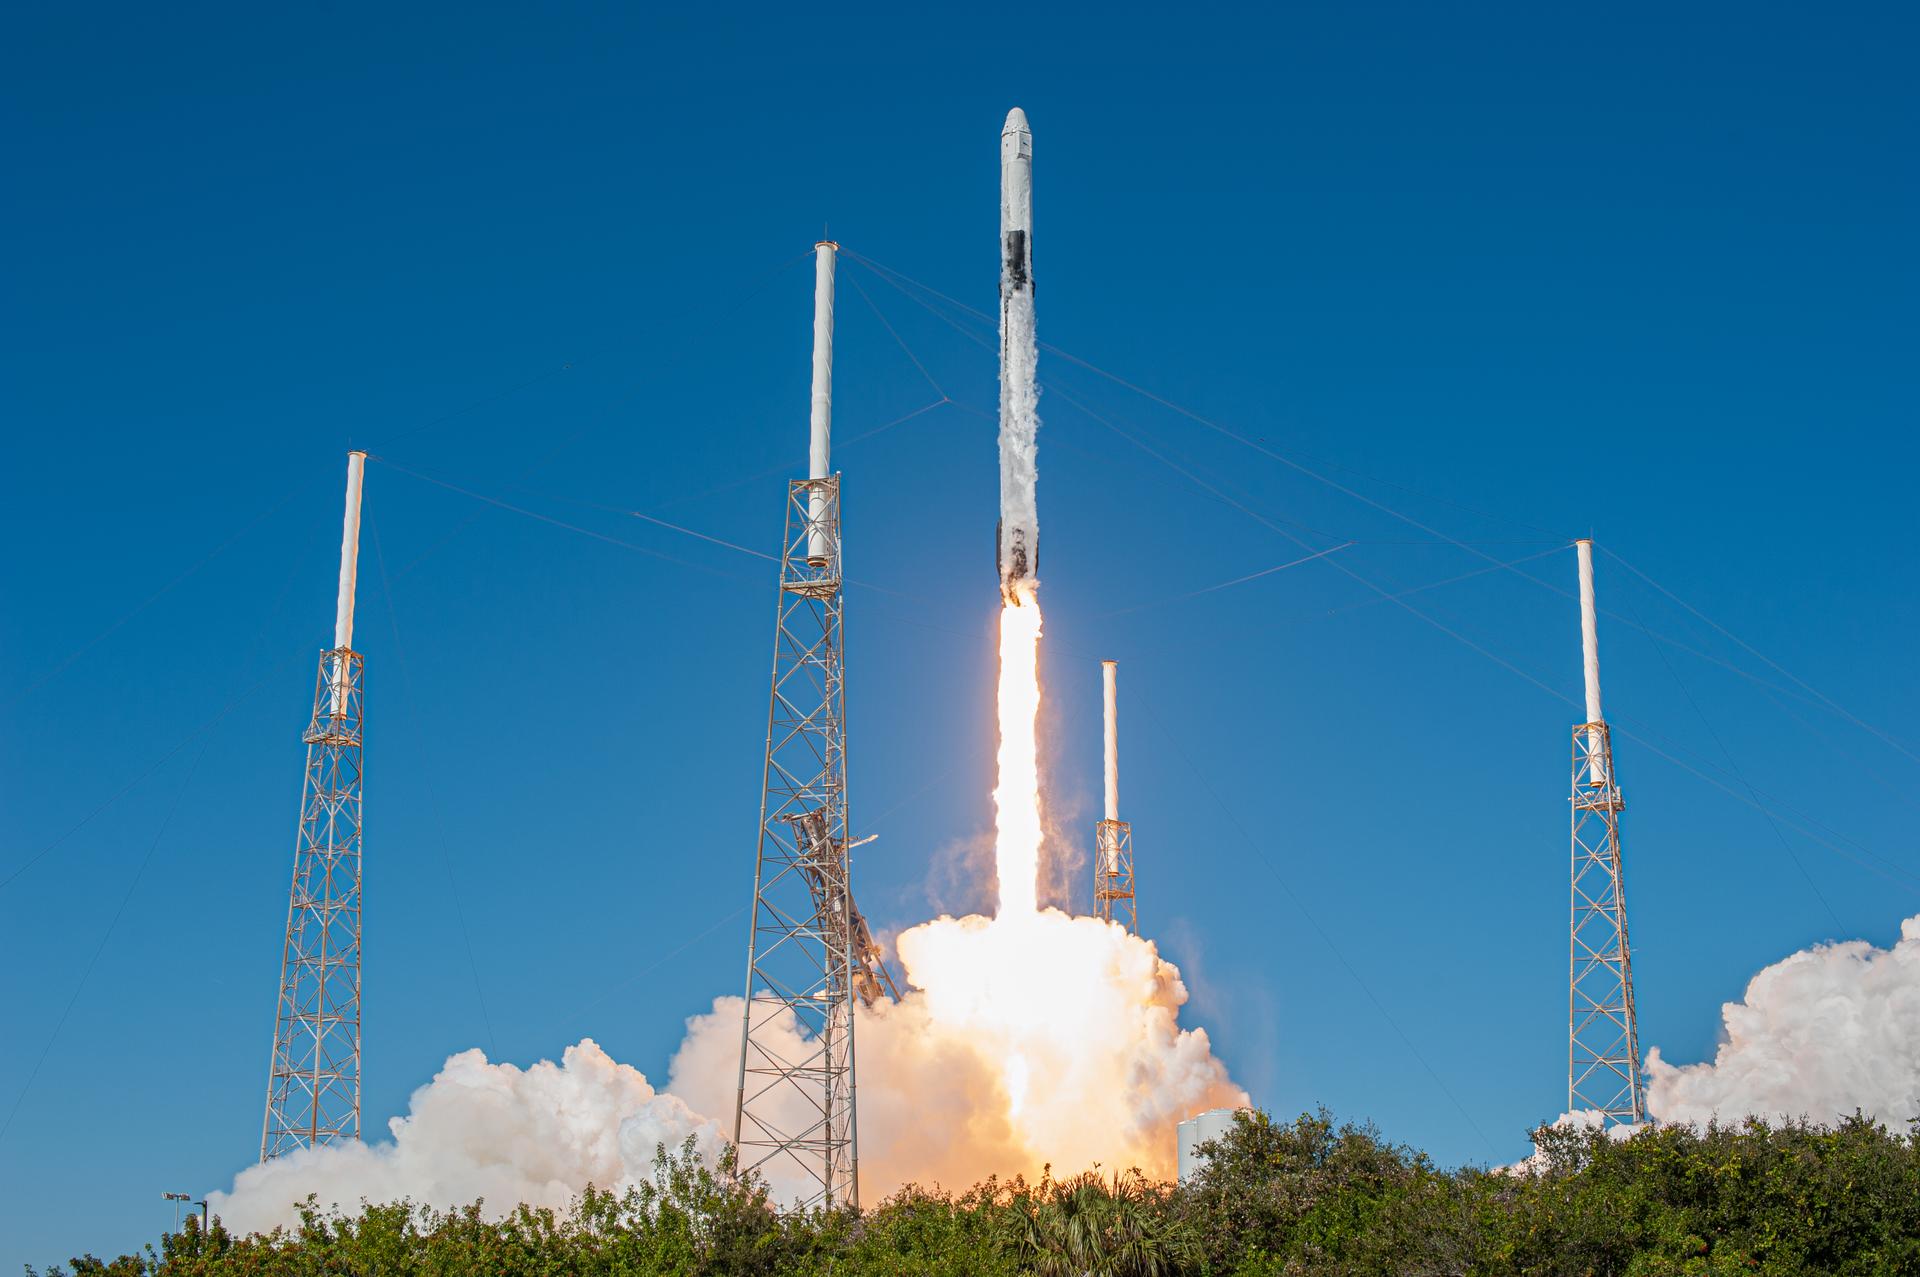 A SpaceX Falcon 9 rocket lifts off from Space Launch Complex 40 at Cape Canaveral Air Force Station in Florida 